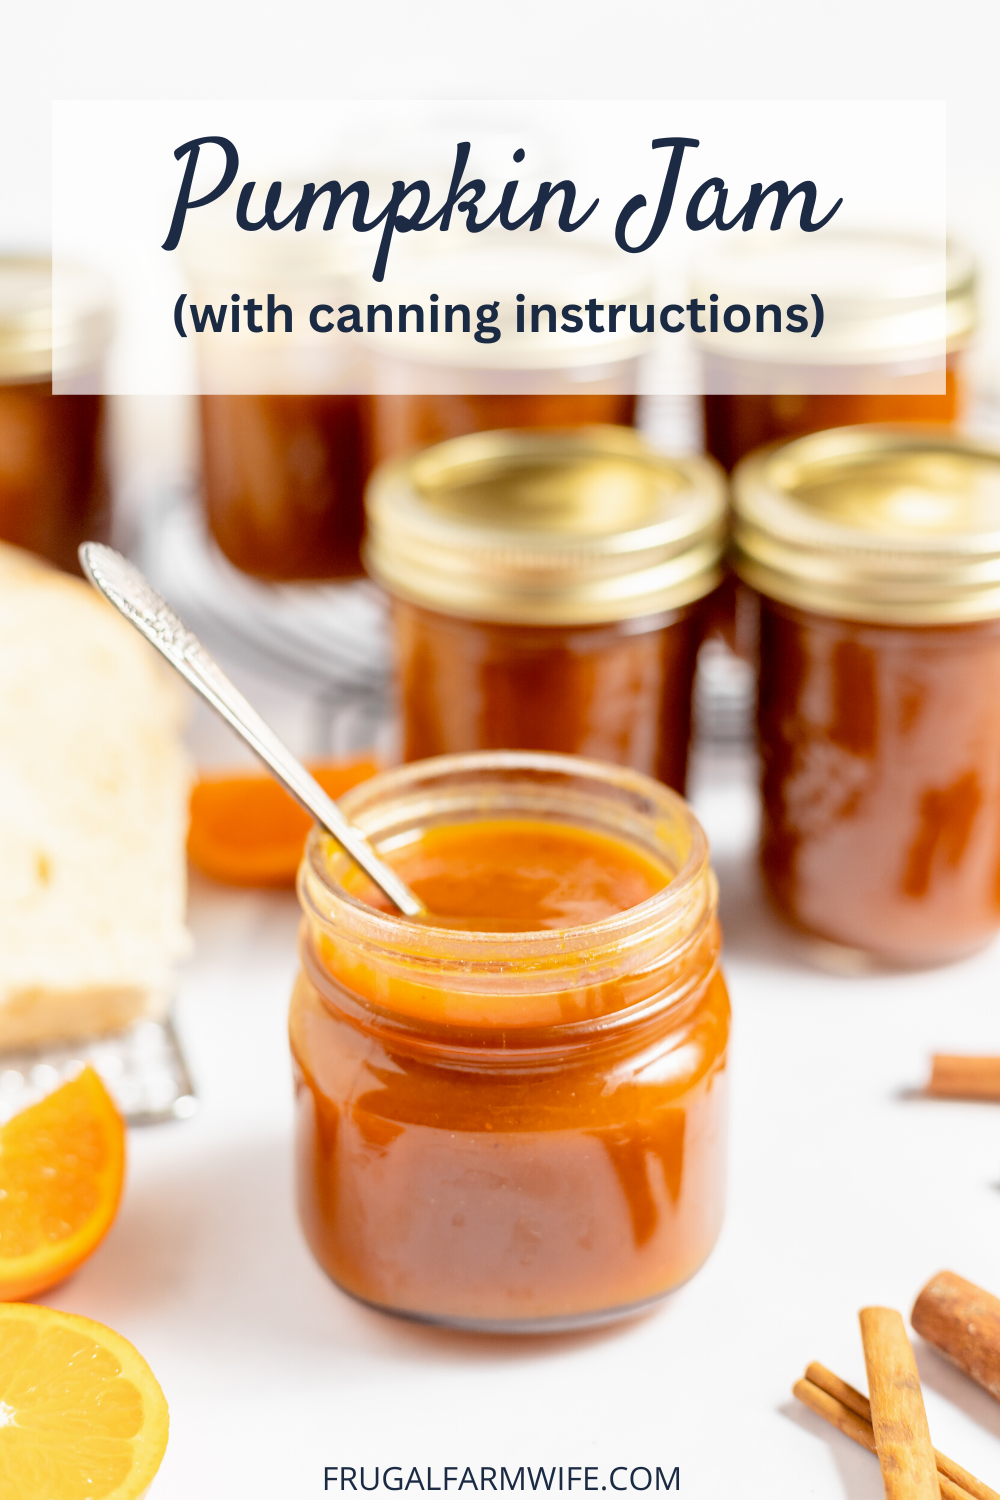 Image shows a small open jar of pumpkin jam with a spoon in it. Behind are many more jars of pumpkin jam sealed. Text above reads "Pumpkin Jam (with canning instructions)"